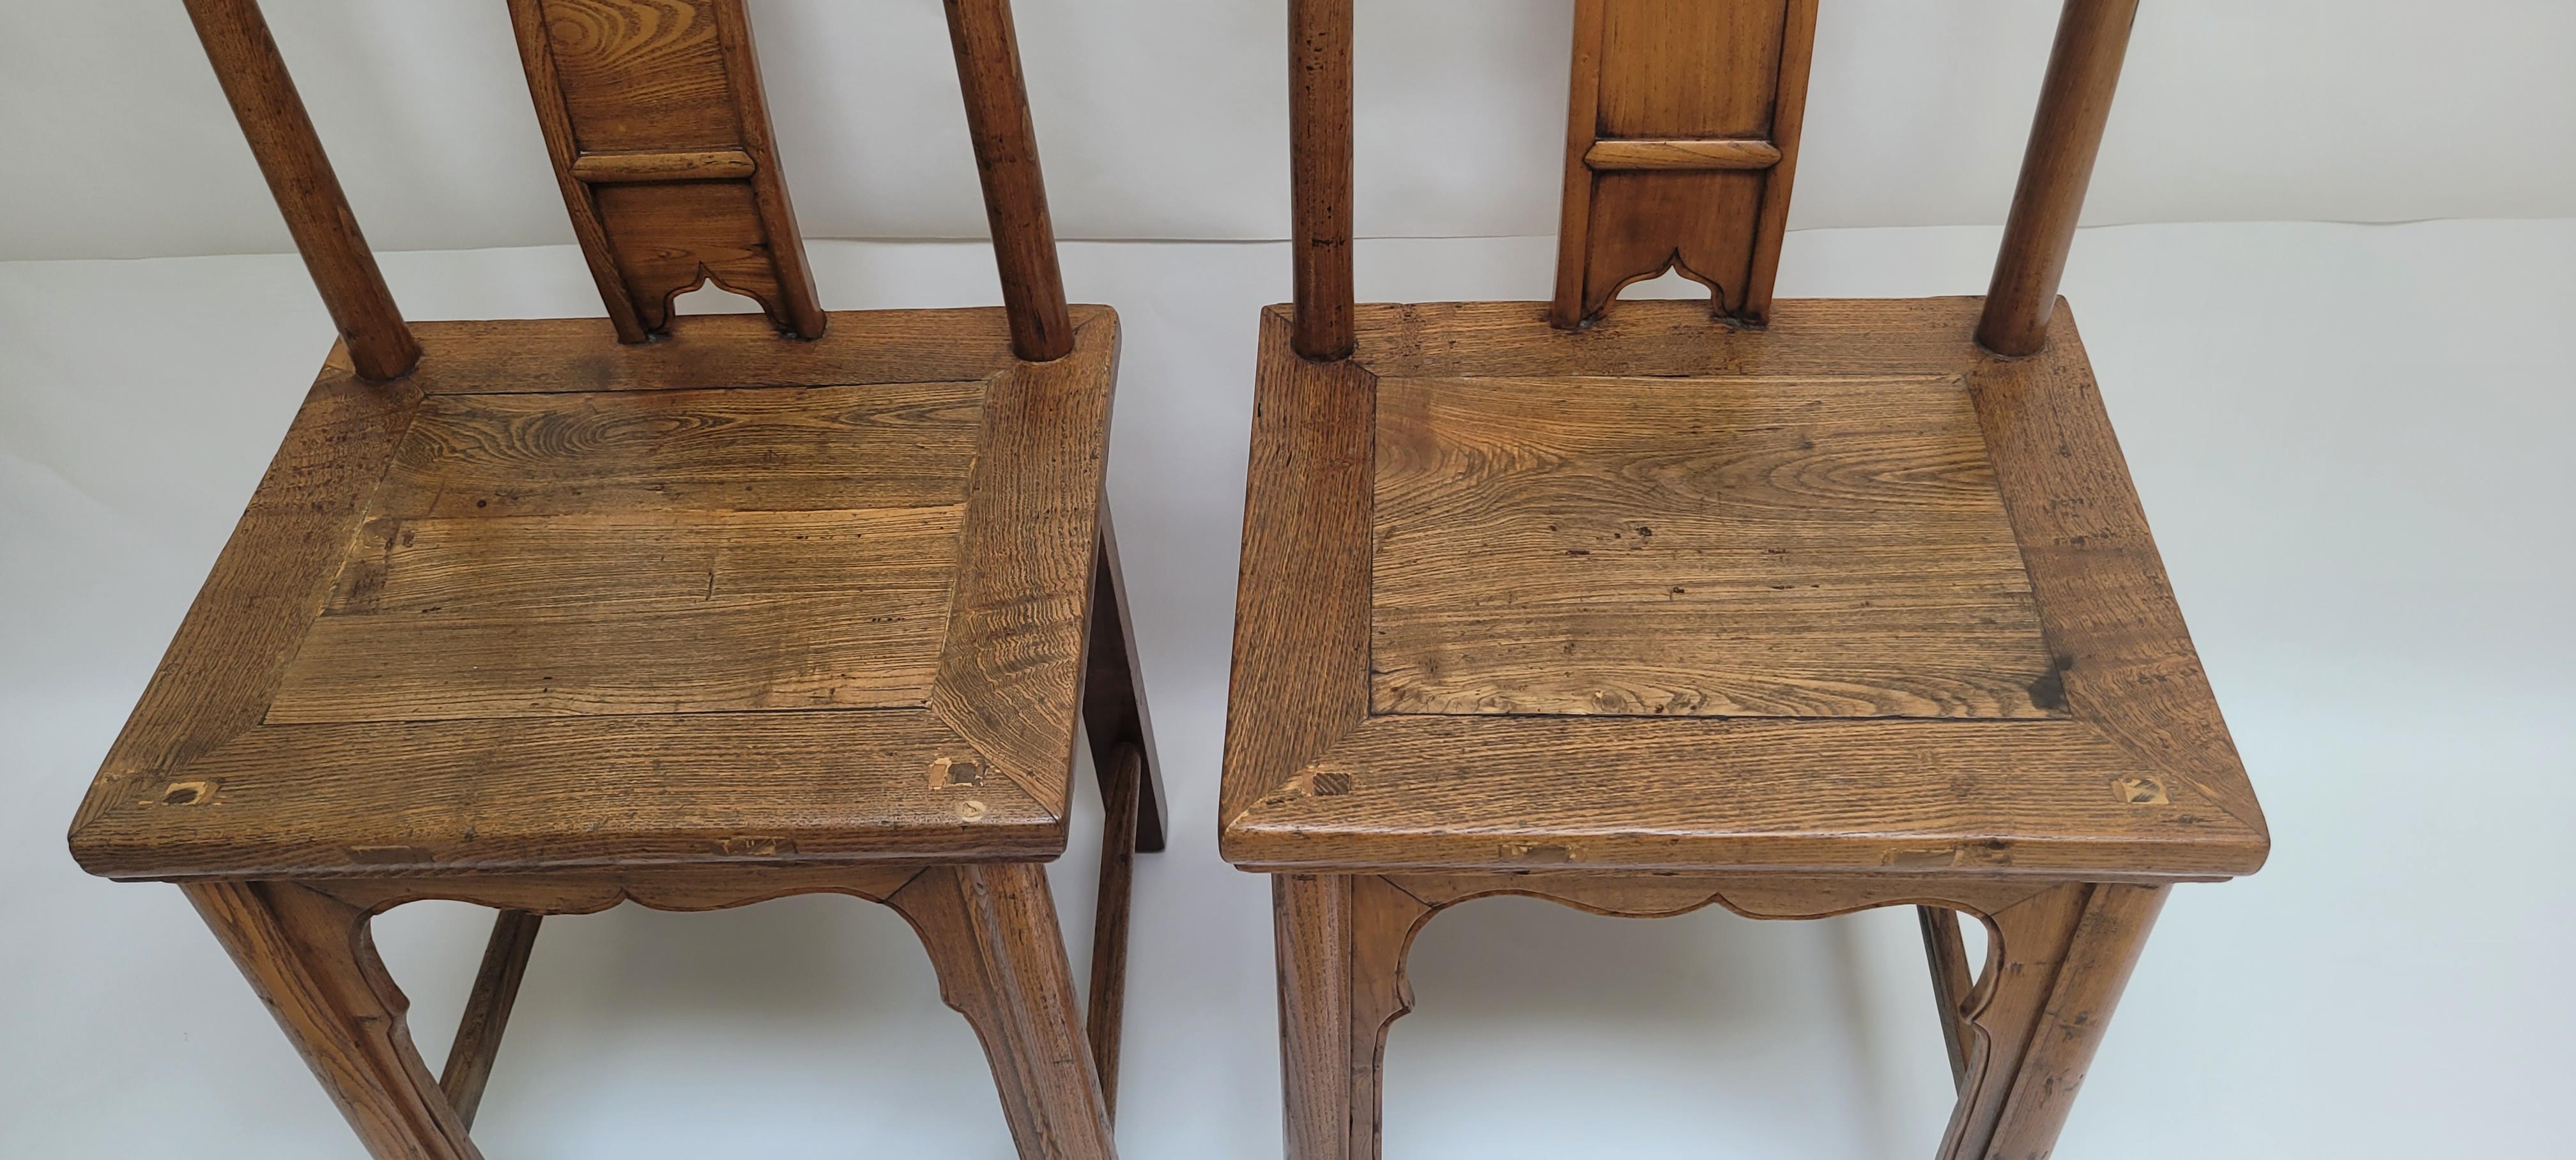 Pair of Lamphangar Chairs, 19th Century For Sale 2